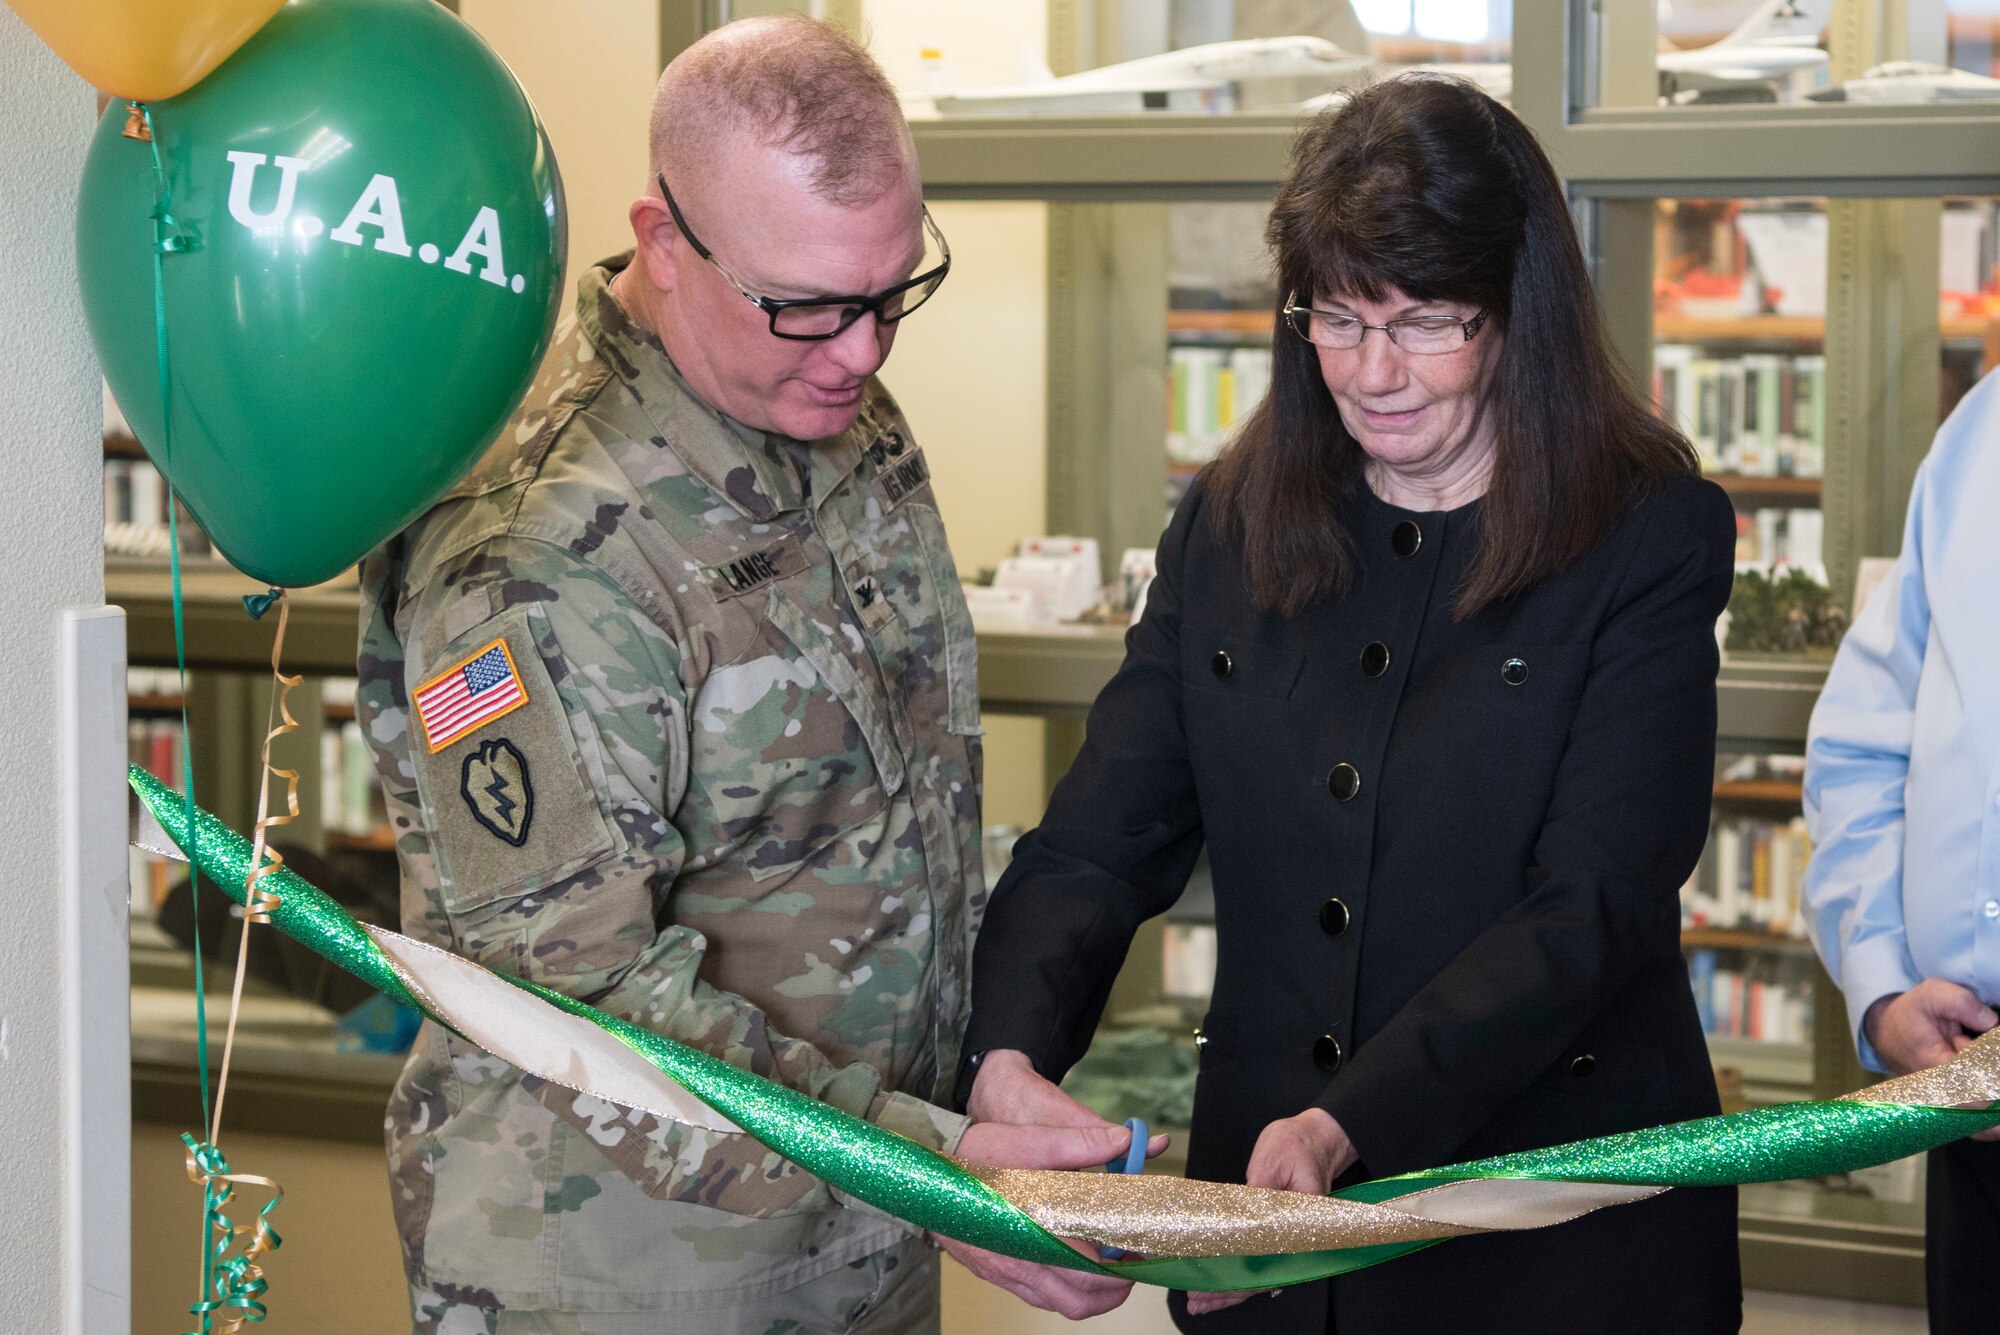 U.S. Army Col. Adam Lange, 673d Air Base Wing vice commander, and Renee Carter-Chapman, University of Alaska Anchorage (UAA) senior vice provost, cut the ribbon during a ceremony at the Joint Base Elmendorf-Richardson Education Center Nov. 2, 2018. The ceremony marks the opening of the academic tutoring room sponsored by the UAA. This room is open to all active-duty personnel, dependents and veterans, no matter which school they attend.